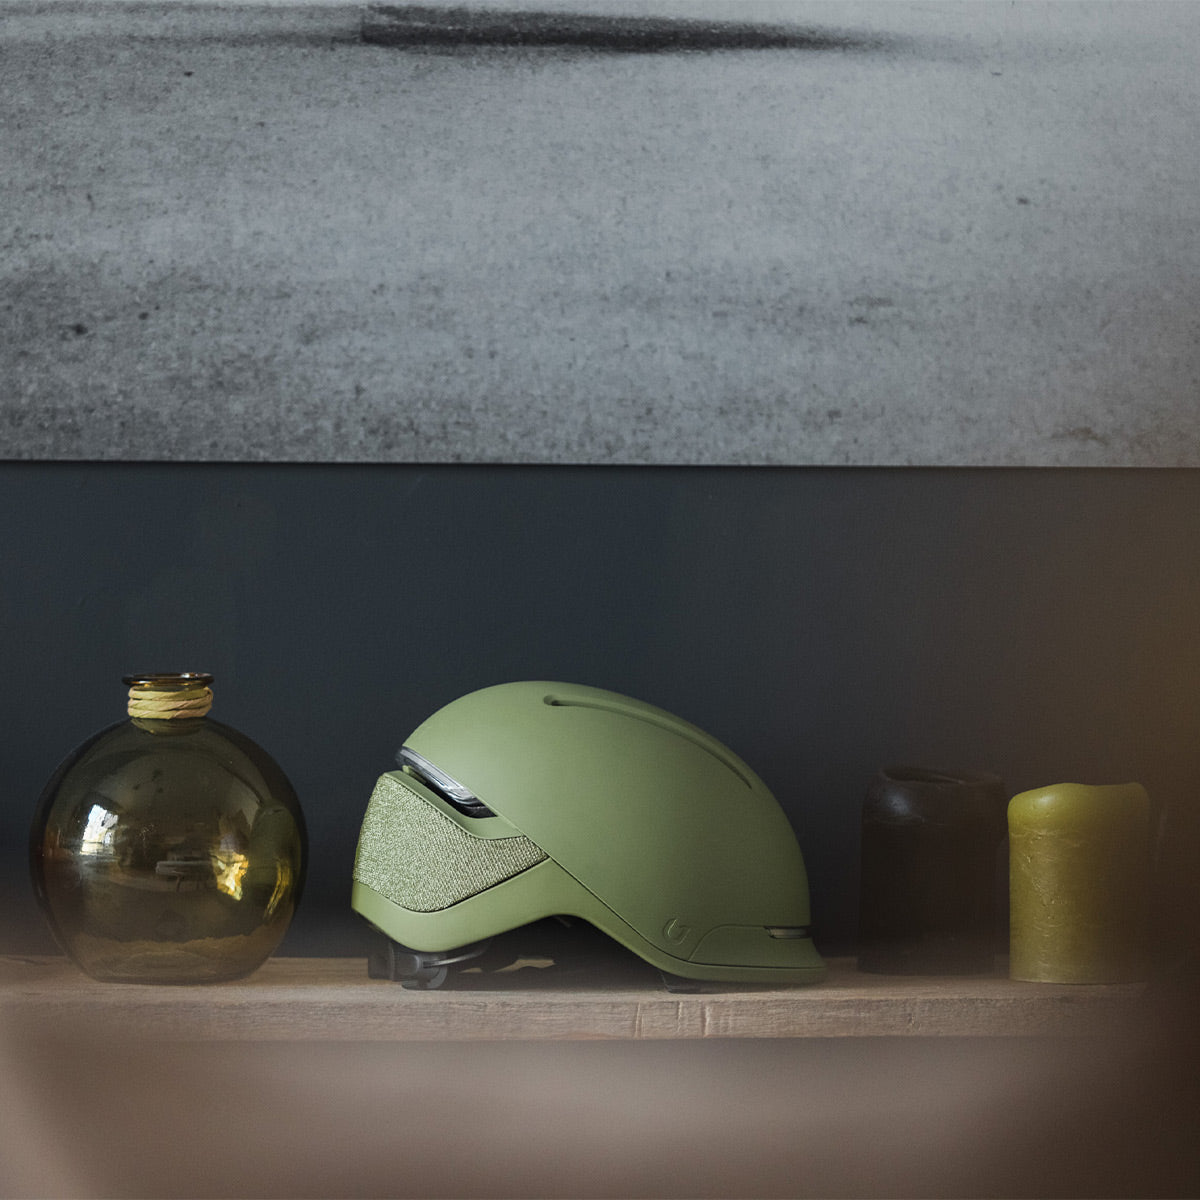 Unit 1 Small FARO Smart Helmet with IPX-6 Rating and Mips Impact Safety System (Juniper)